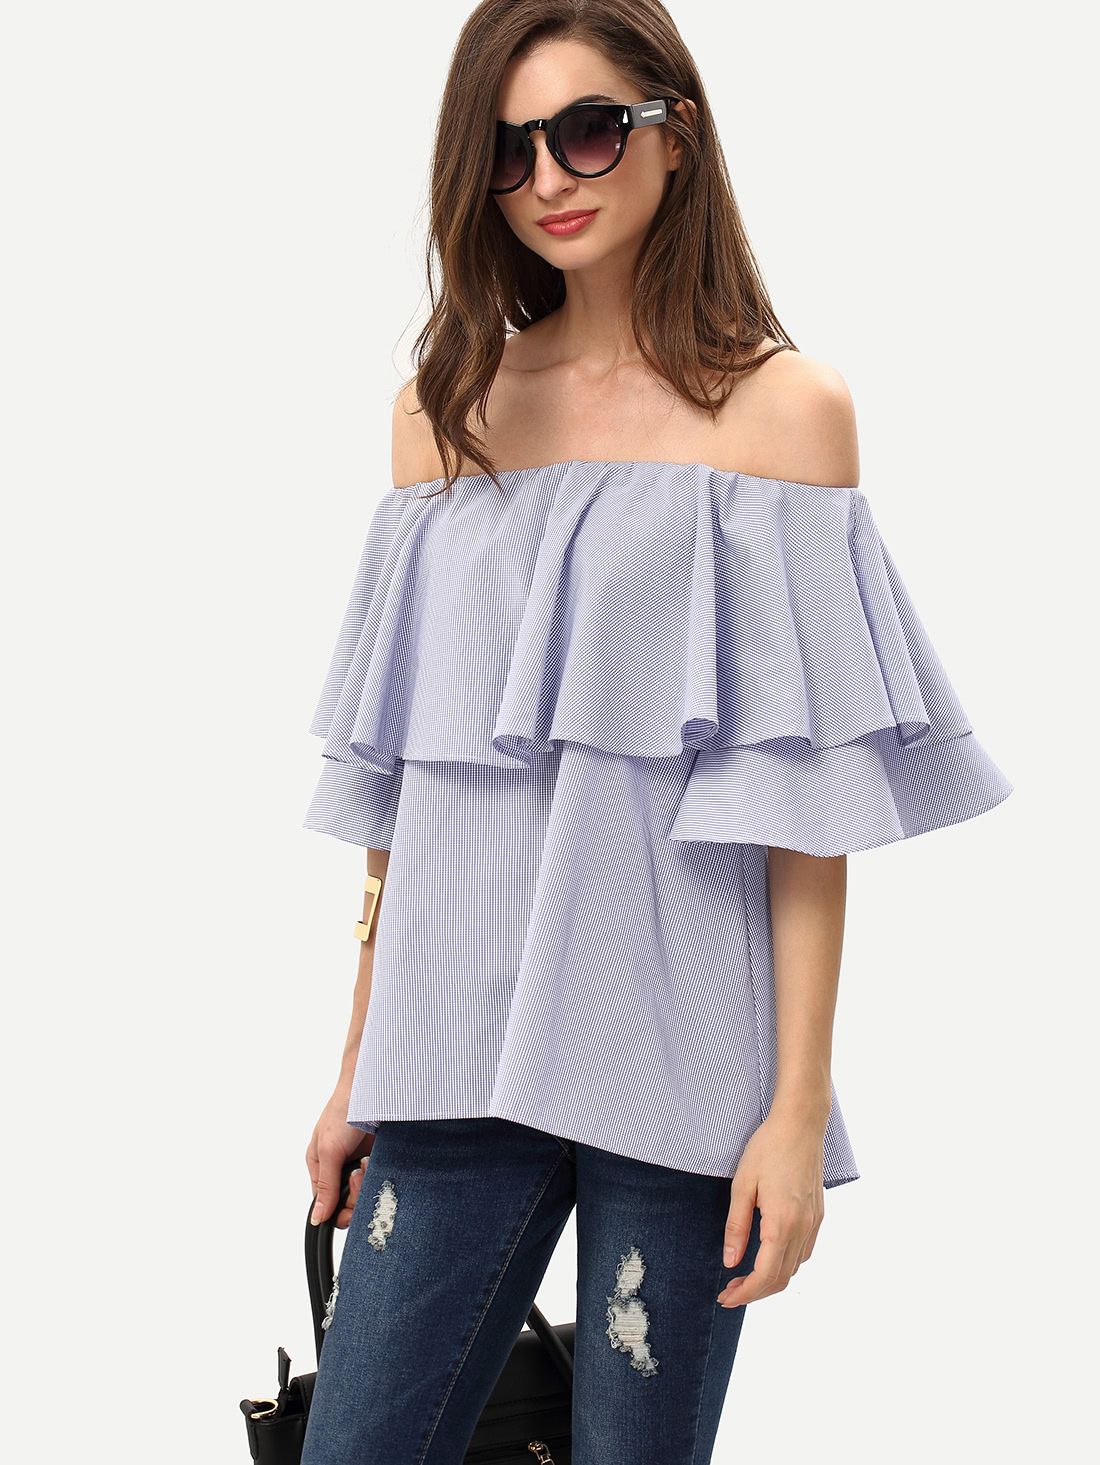 Royal Blue Ruffle Off The Shoulder Blouse | SHEIN